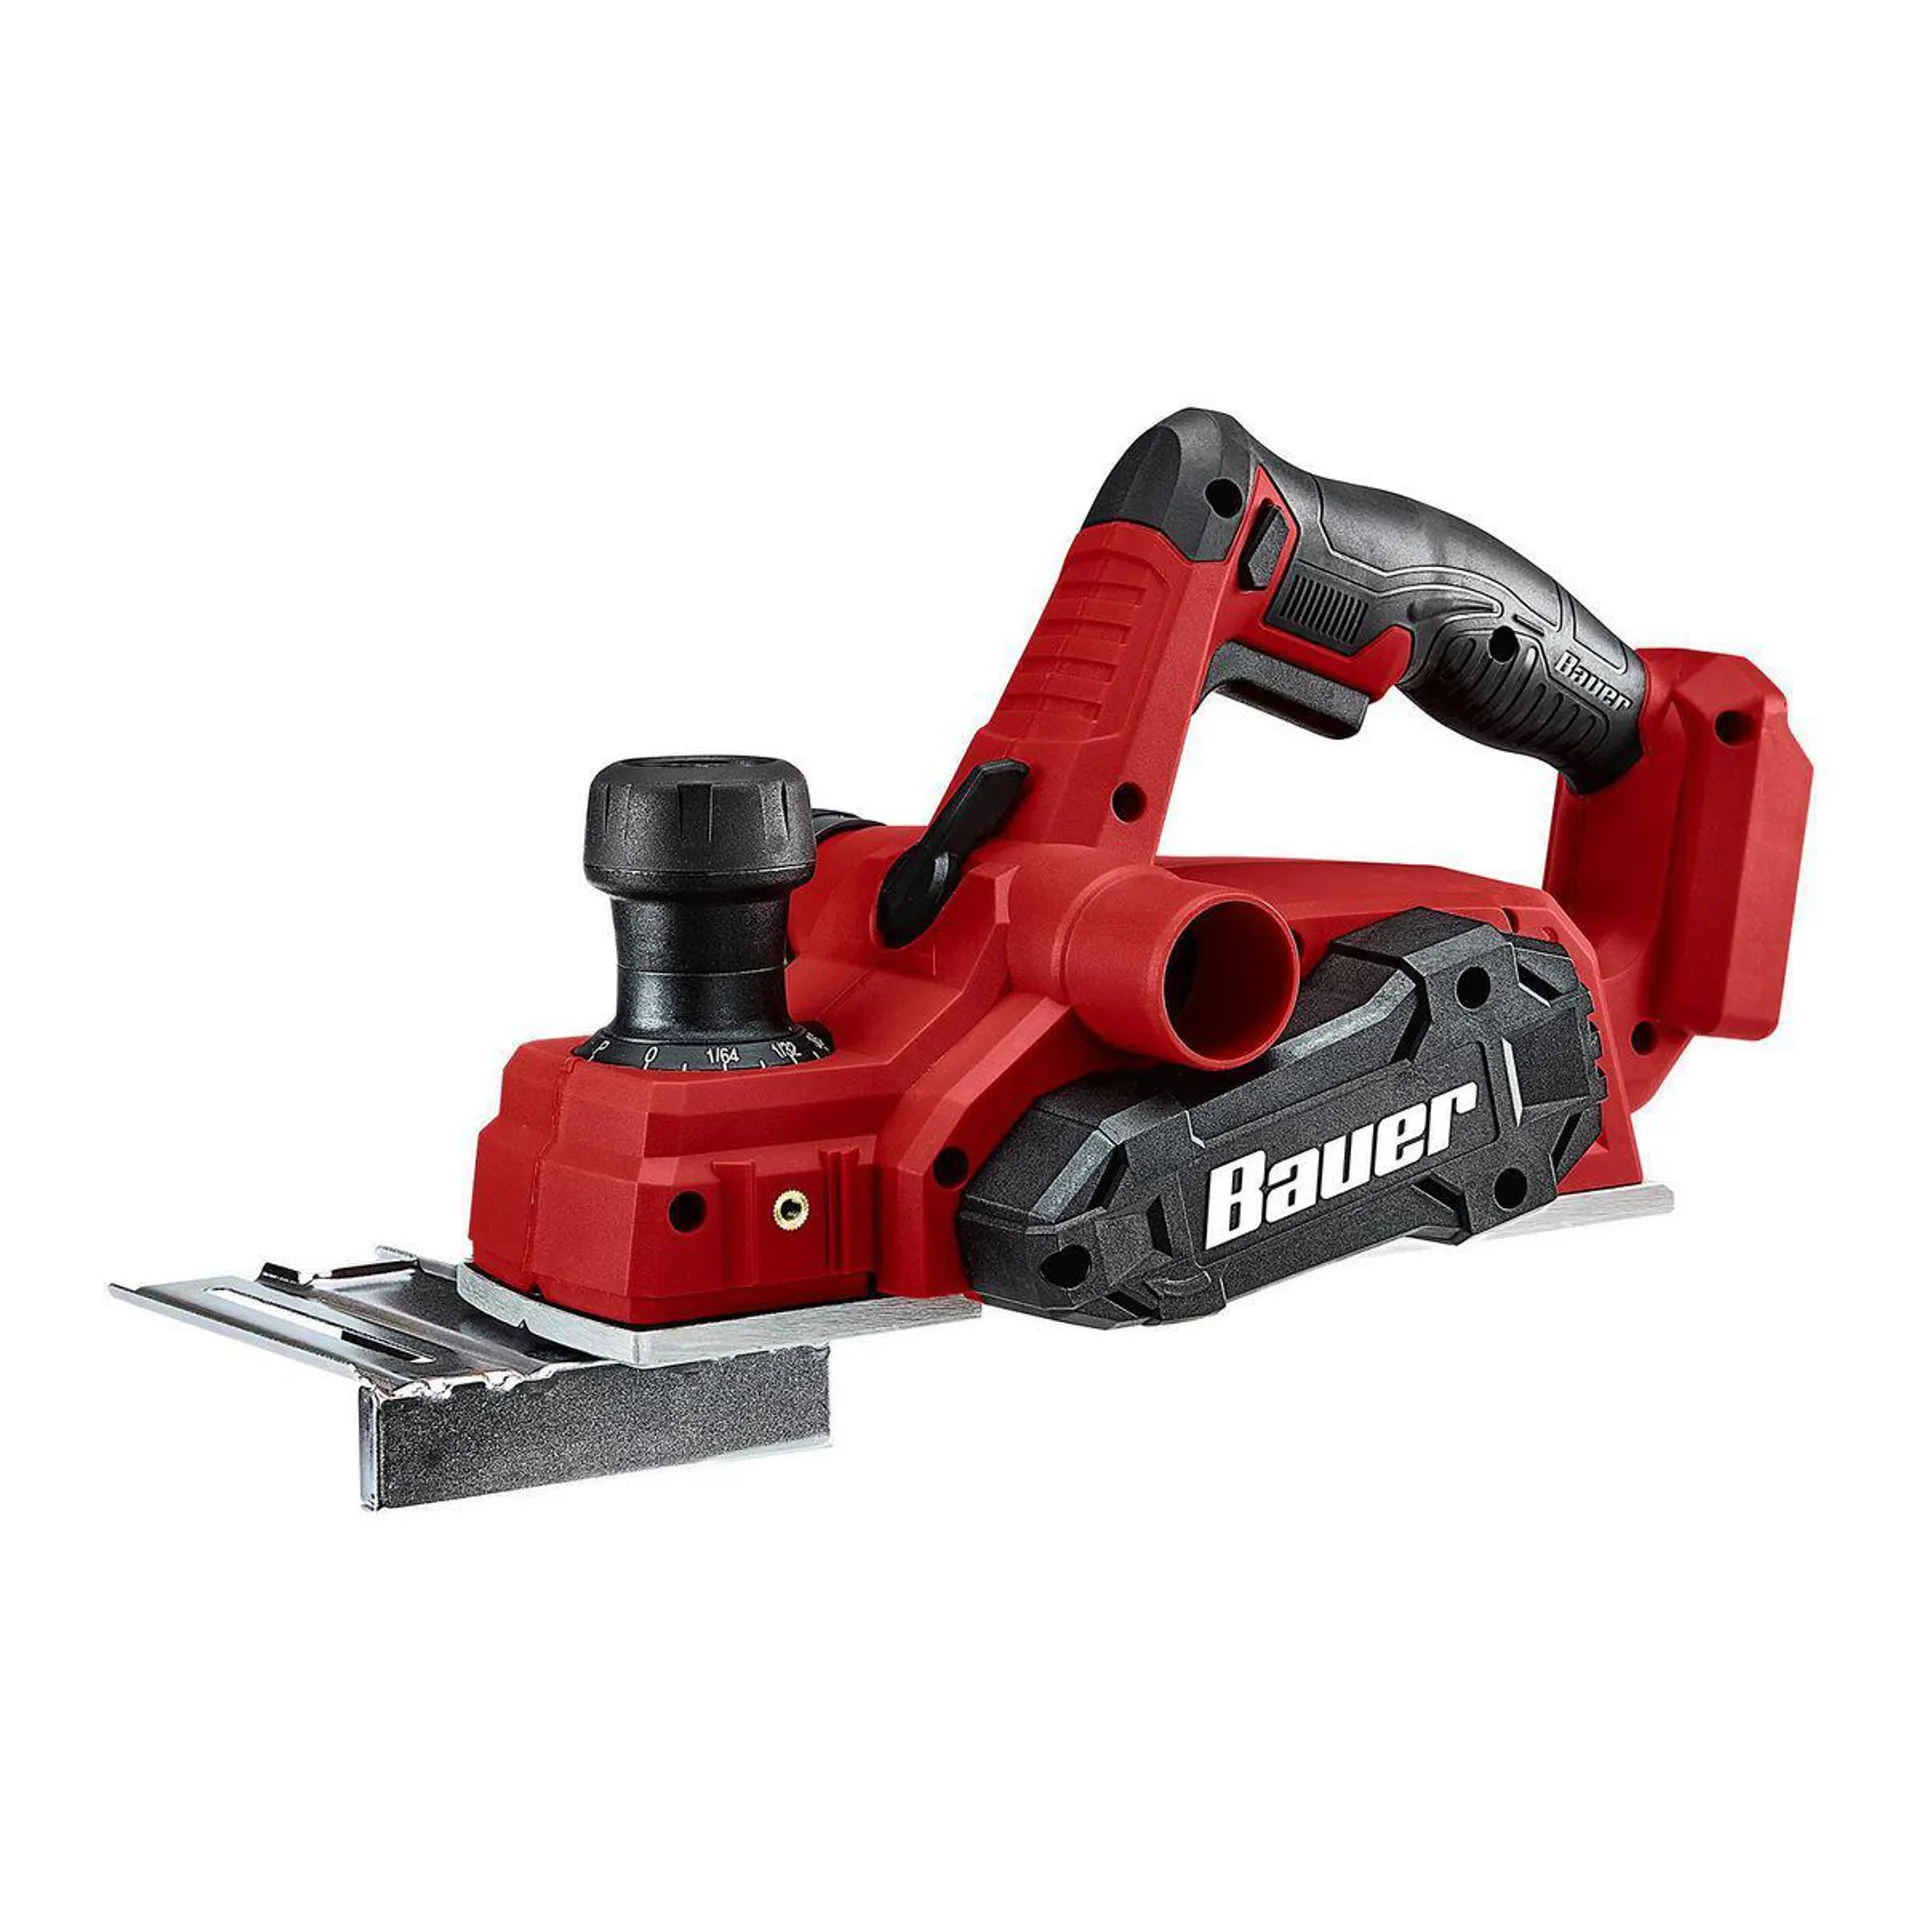 20V Cordless 3-1/4 in. Planer - Tool Only